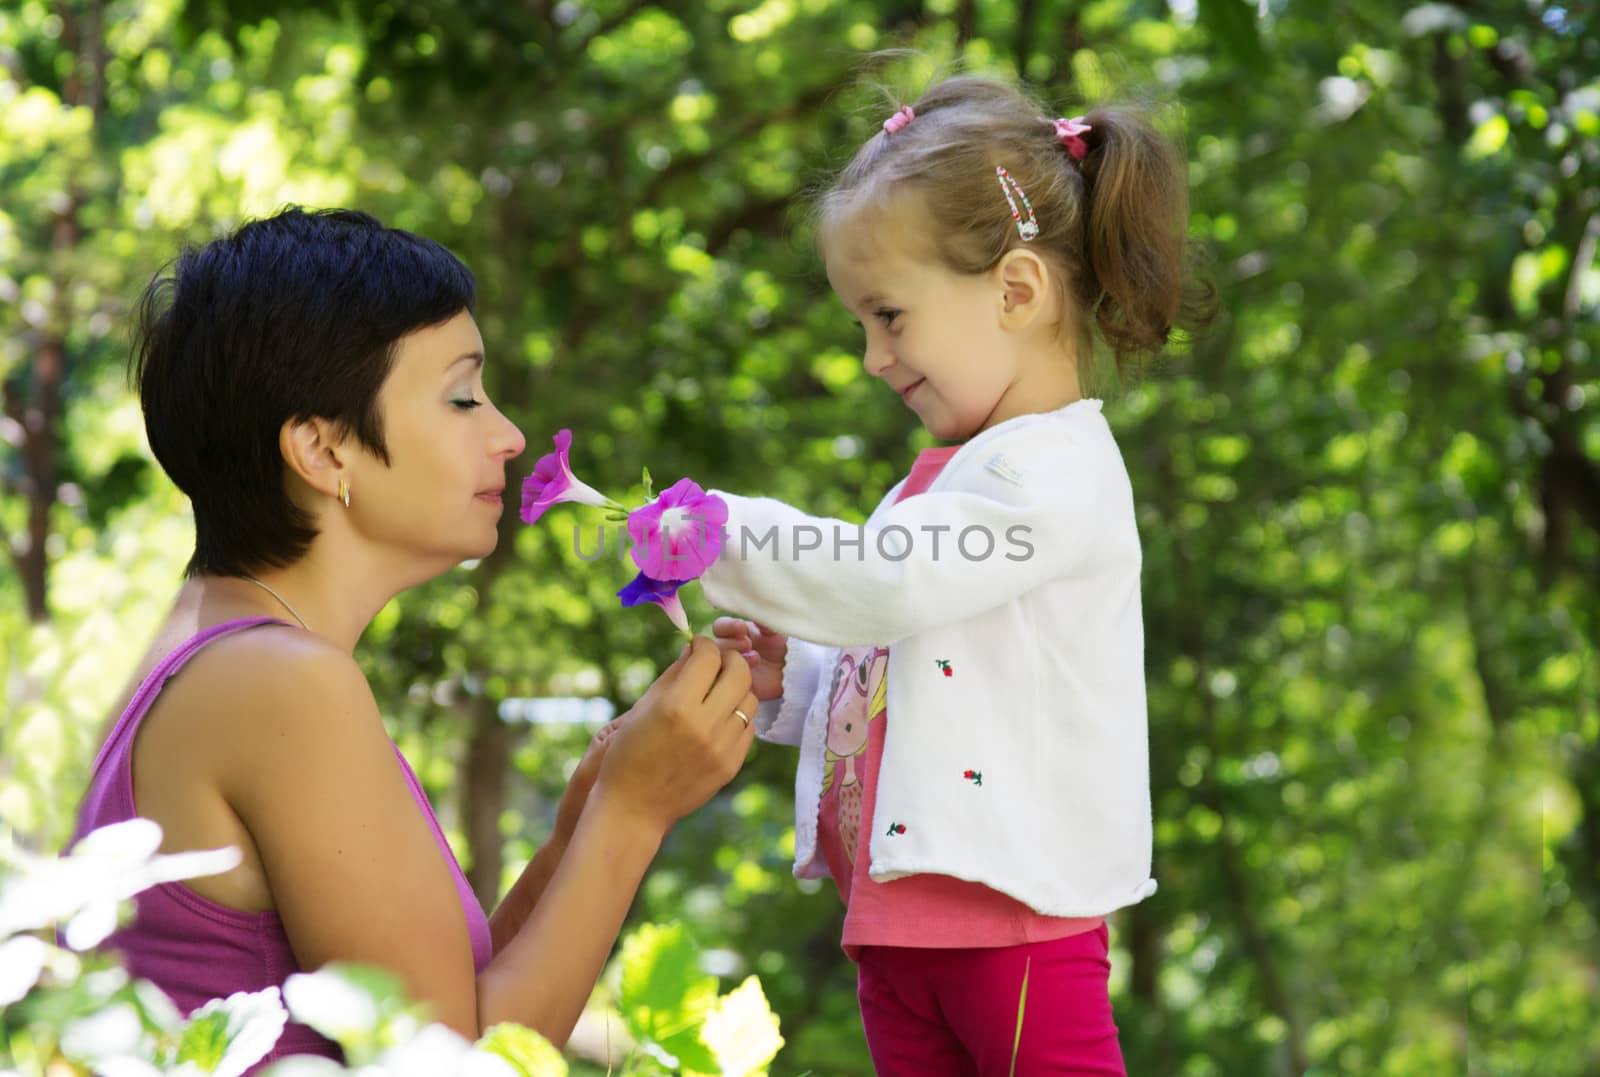 Mother and daughter playing among grass with flowers